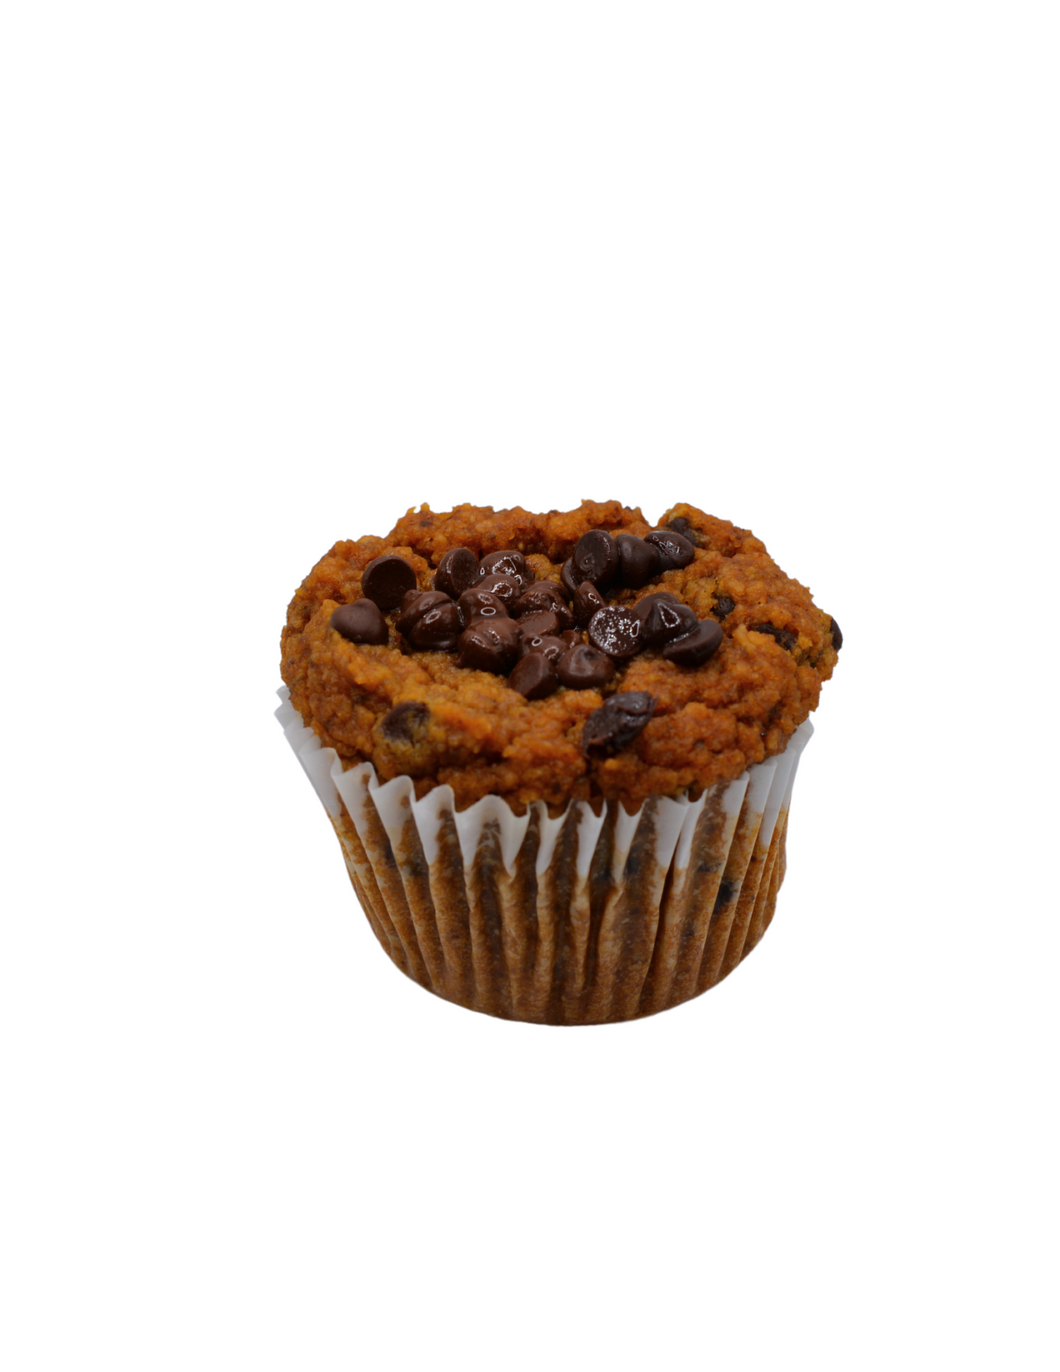 Molly's Pumpkin Chocolate Chip Muffins